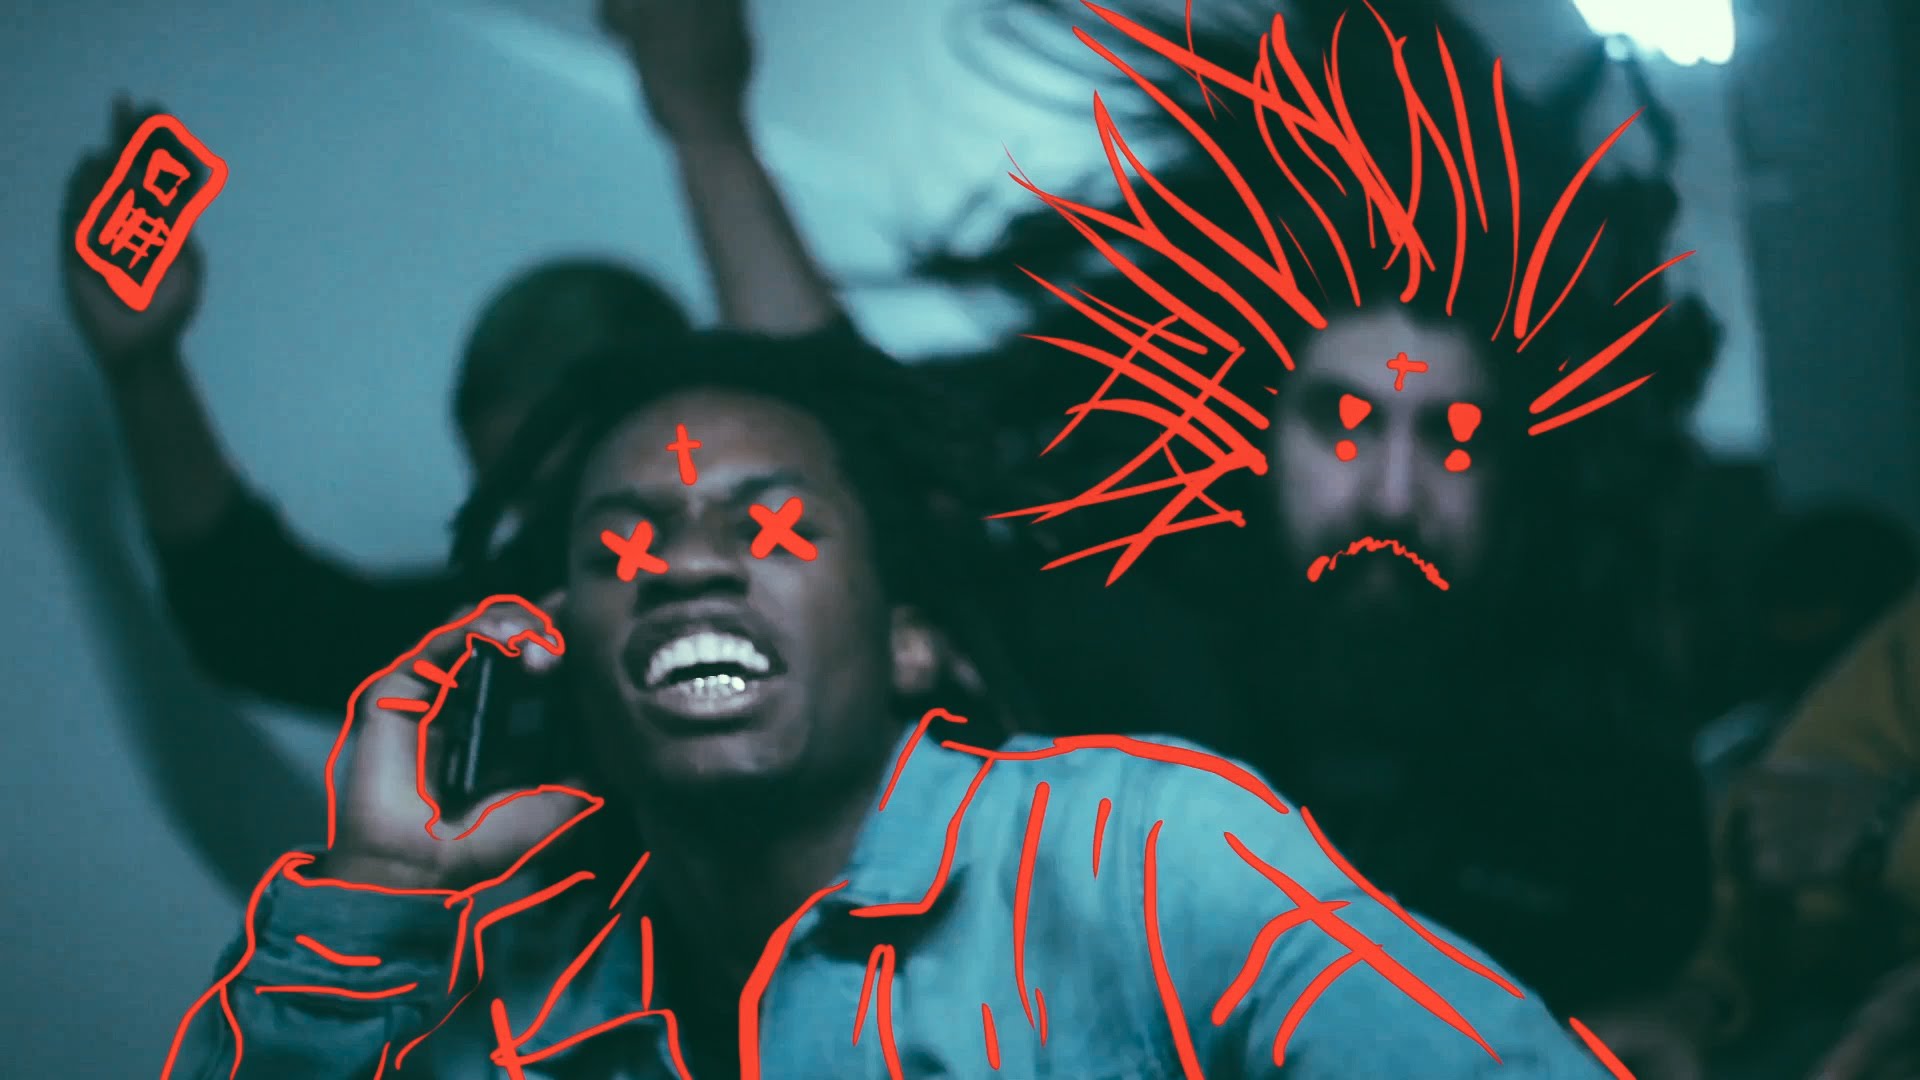 denzel curry ultimate mp3 download